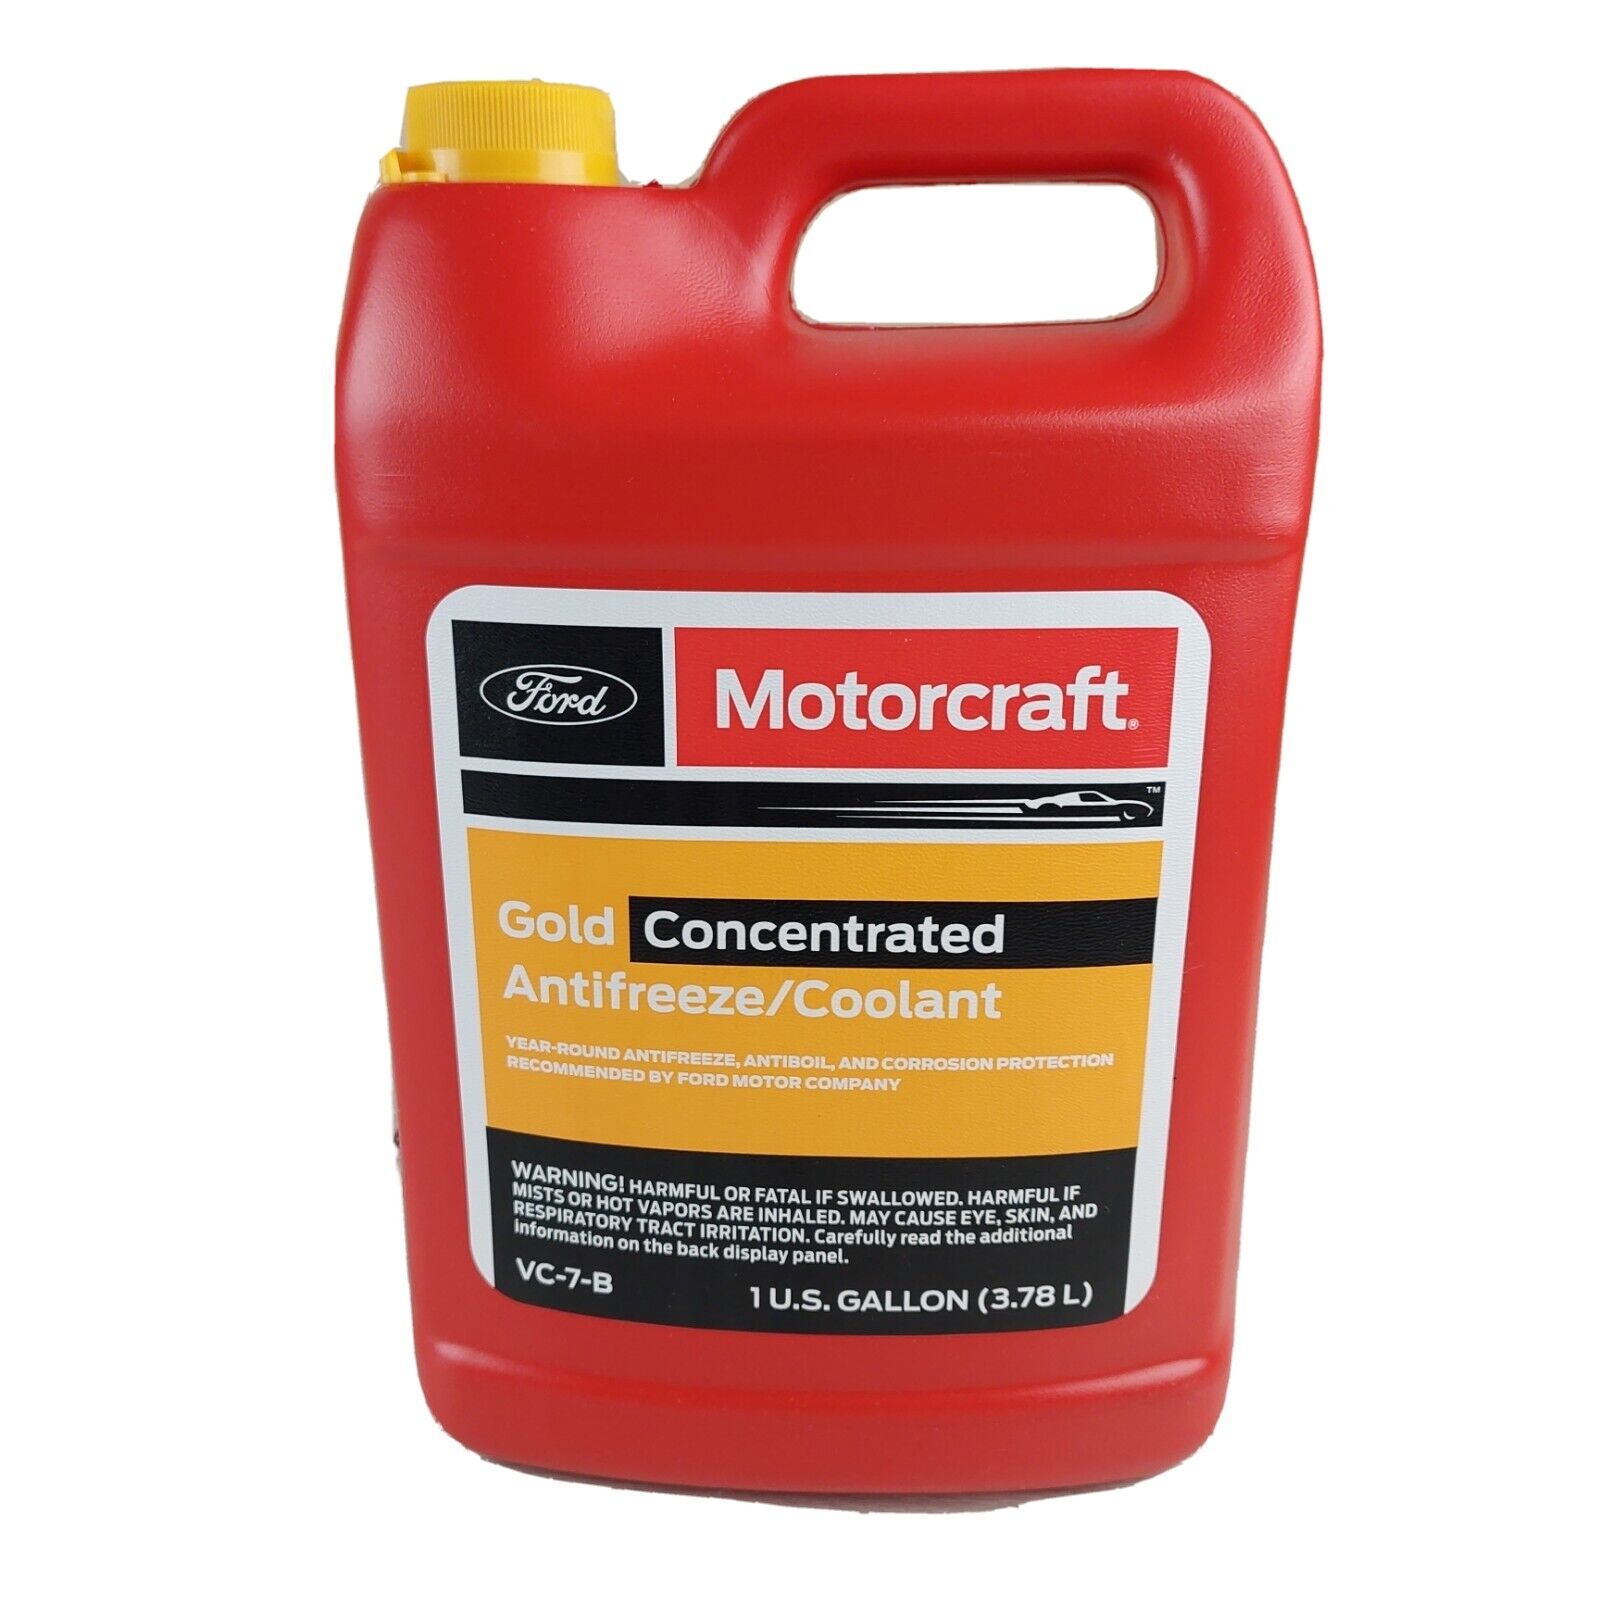 XFM VC7B Motorcraft Antifreeze/Coolant Concentrated (Gold, 1 Gal)